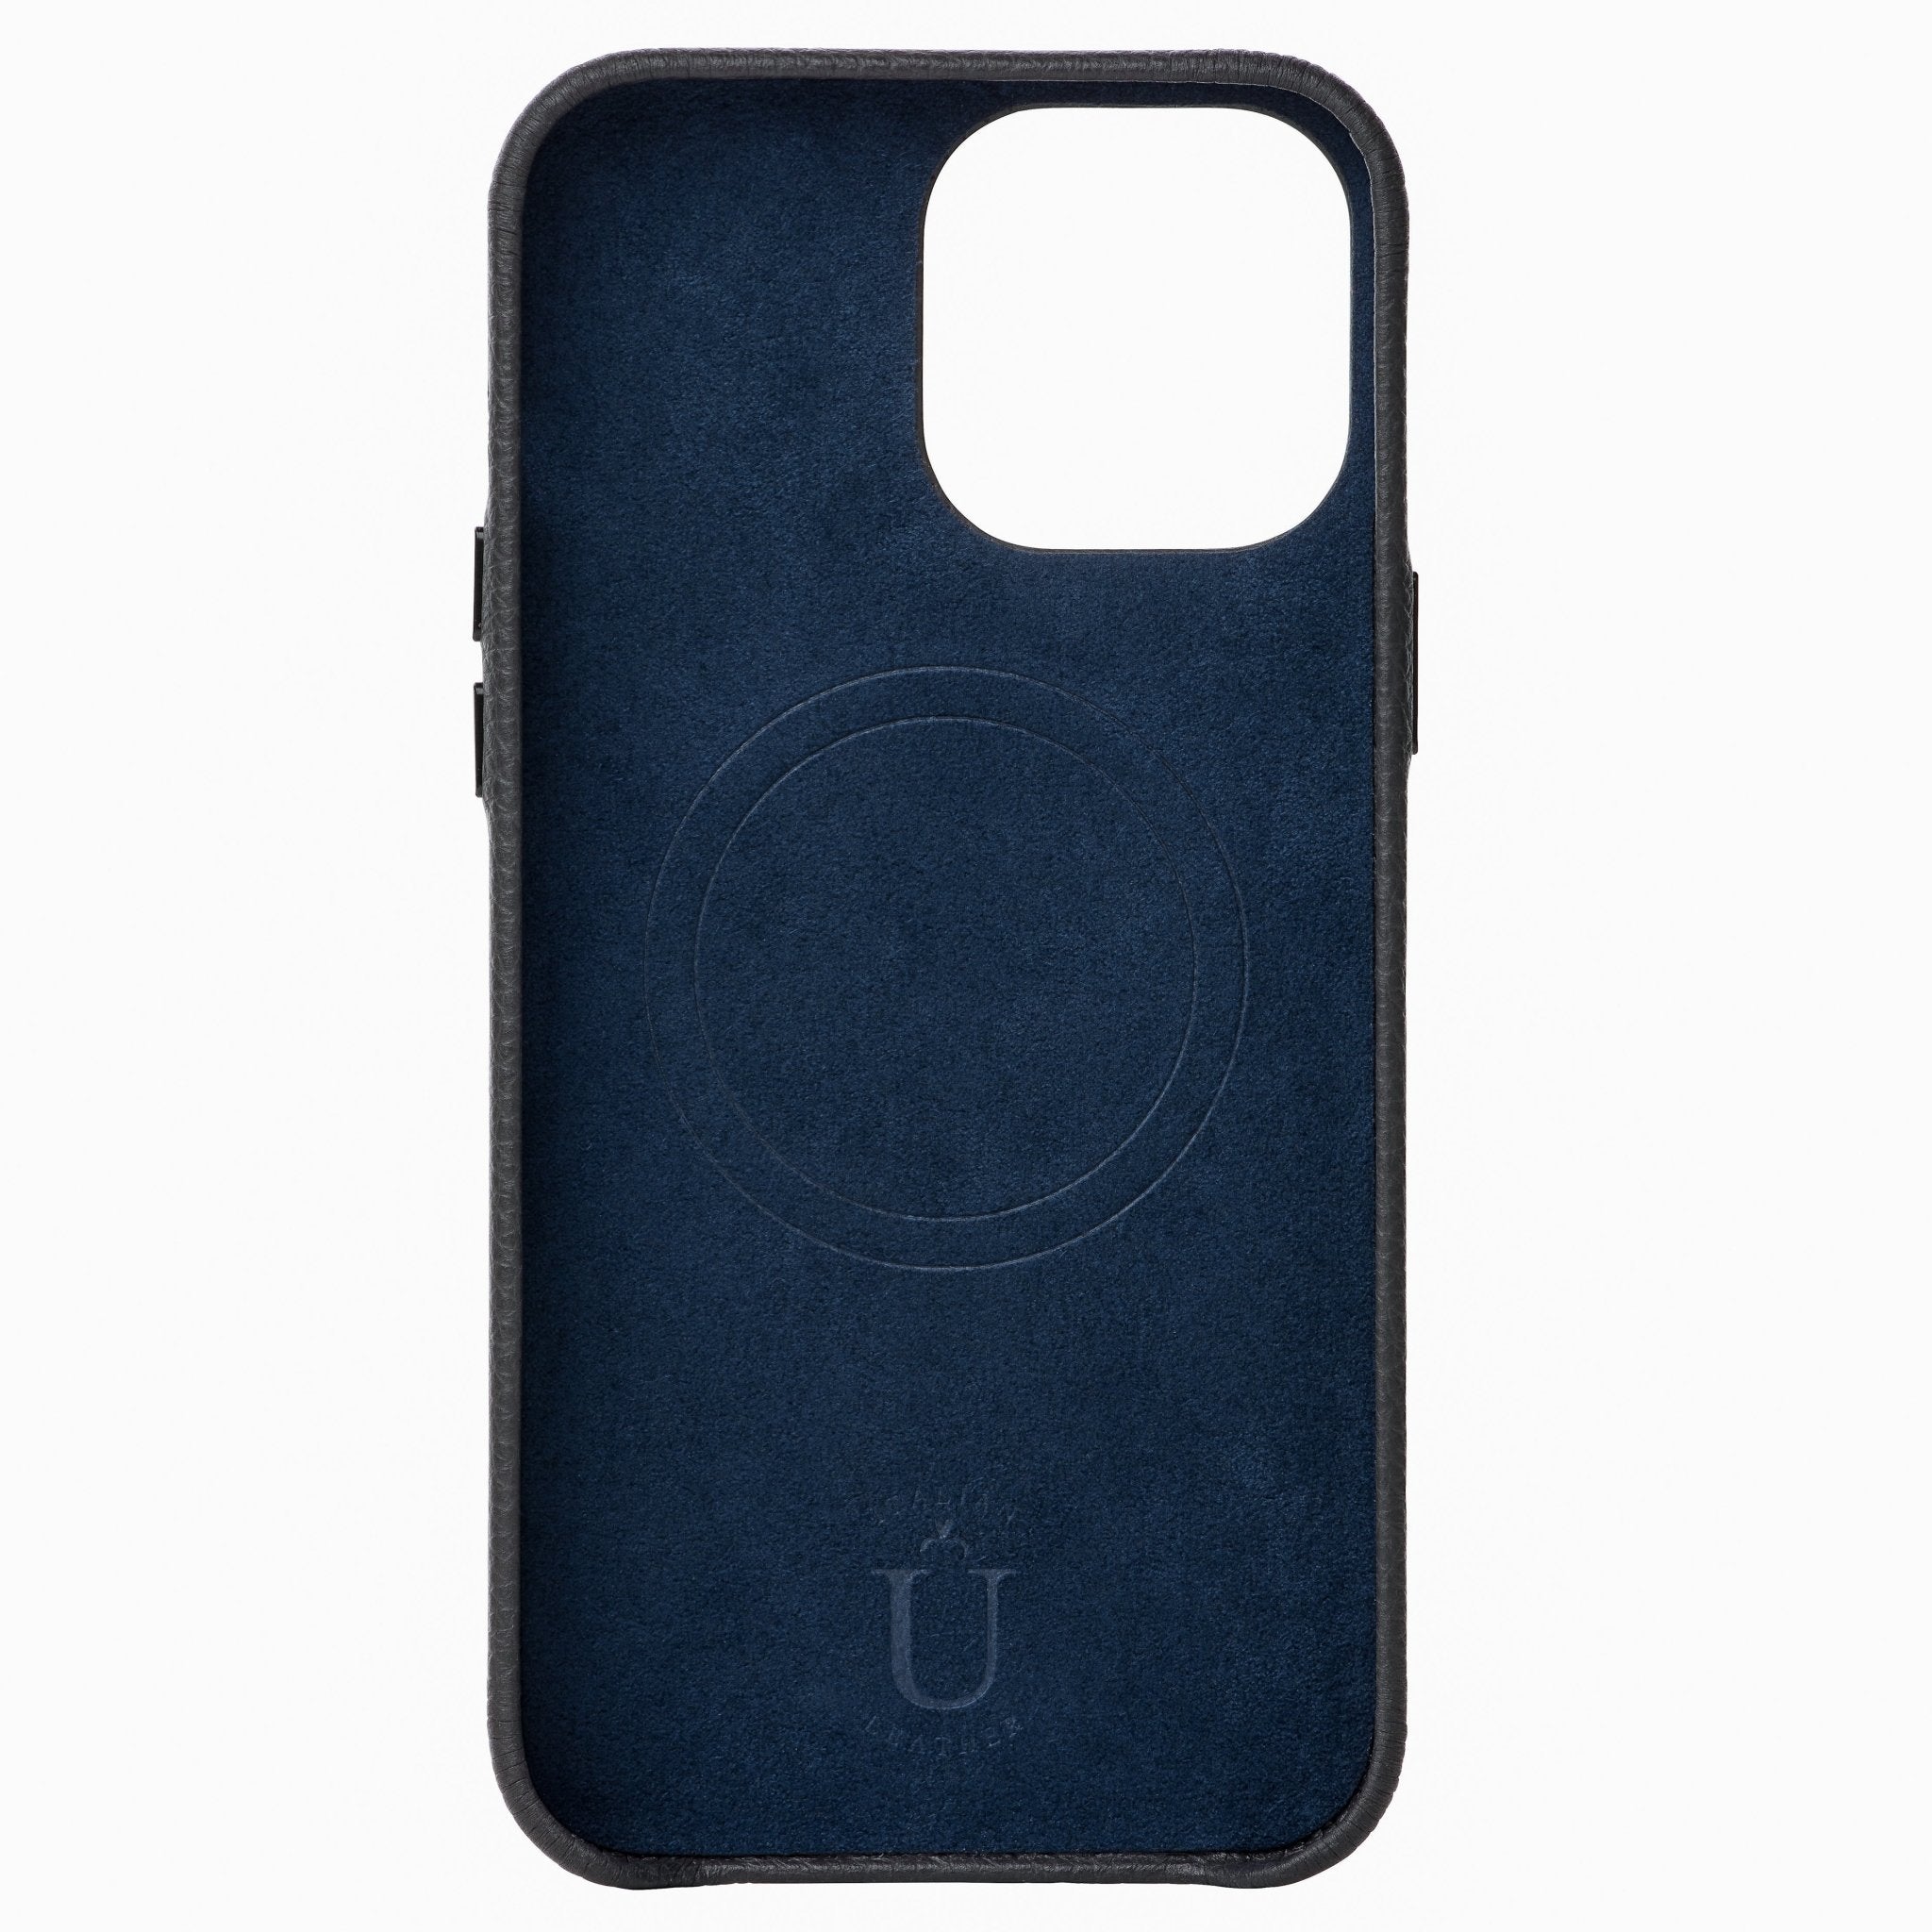 Ubique Italy Luxury iPhone Case 13 Pro Max Pebble Grain Leather Storm Grey Inner Lining